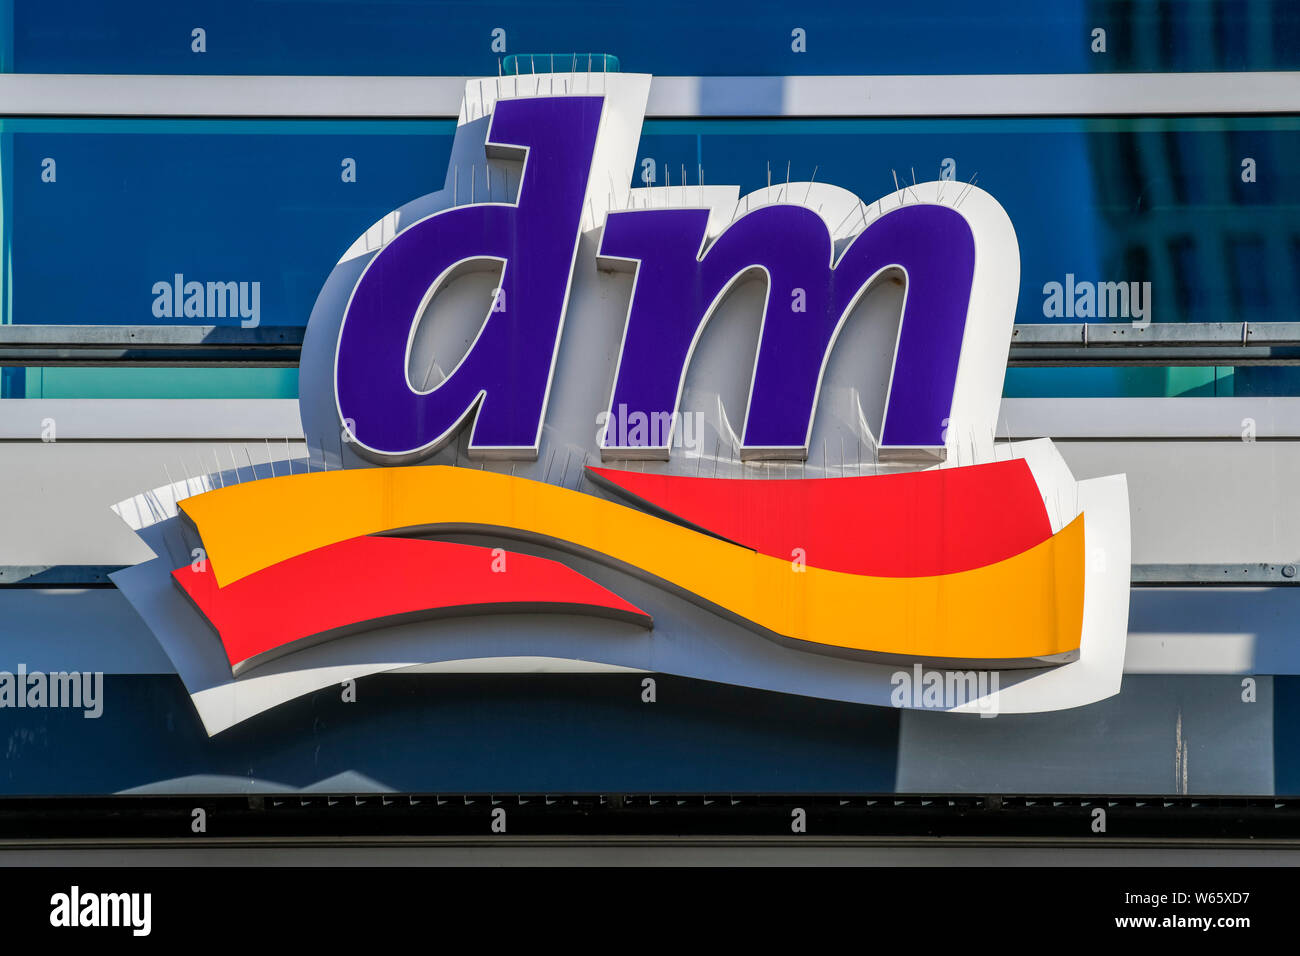 Dm Logo High Resolution Stock Photography and Images - Alamy